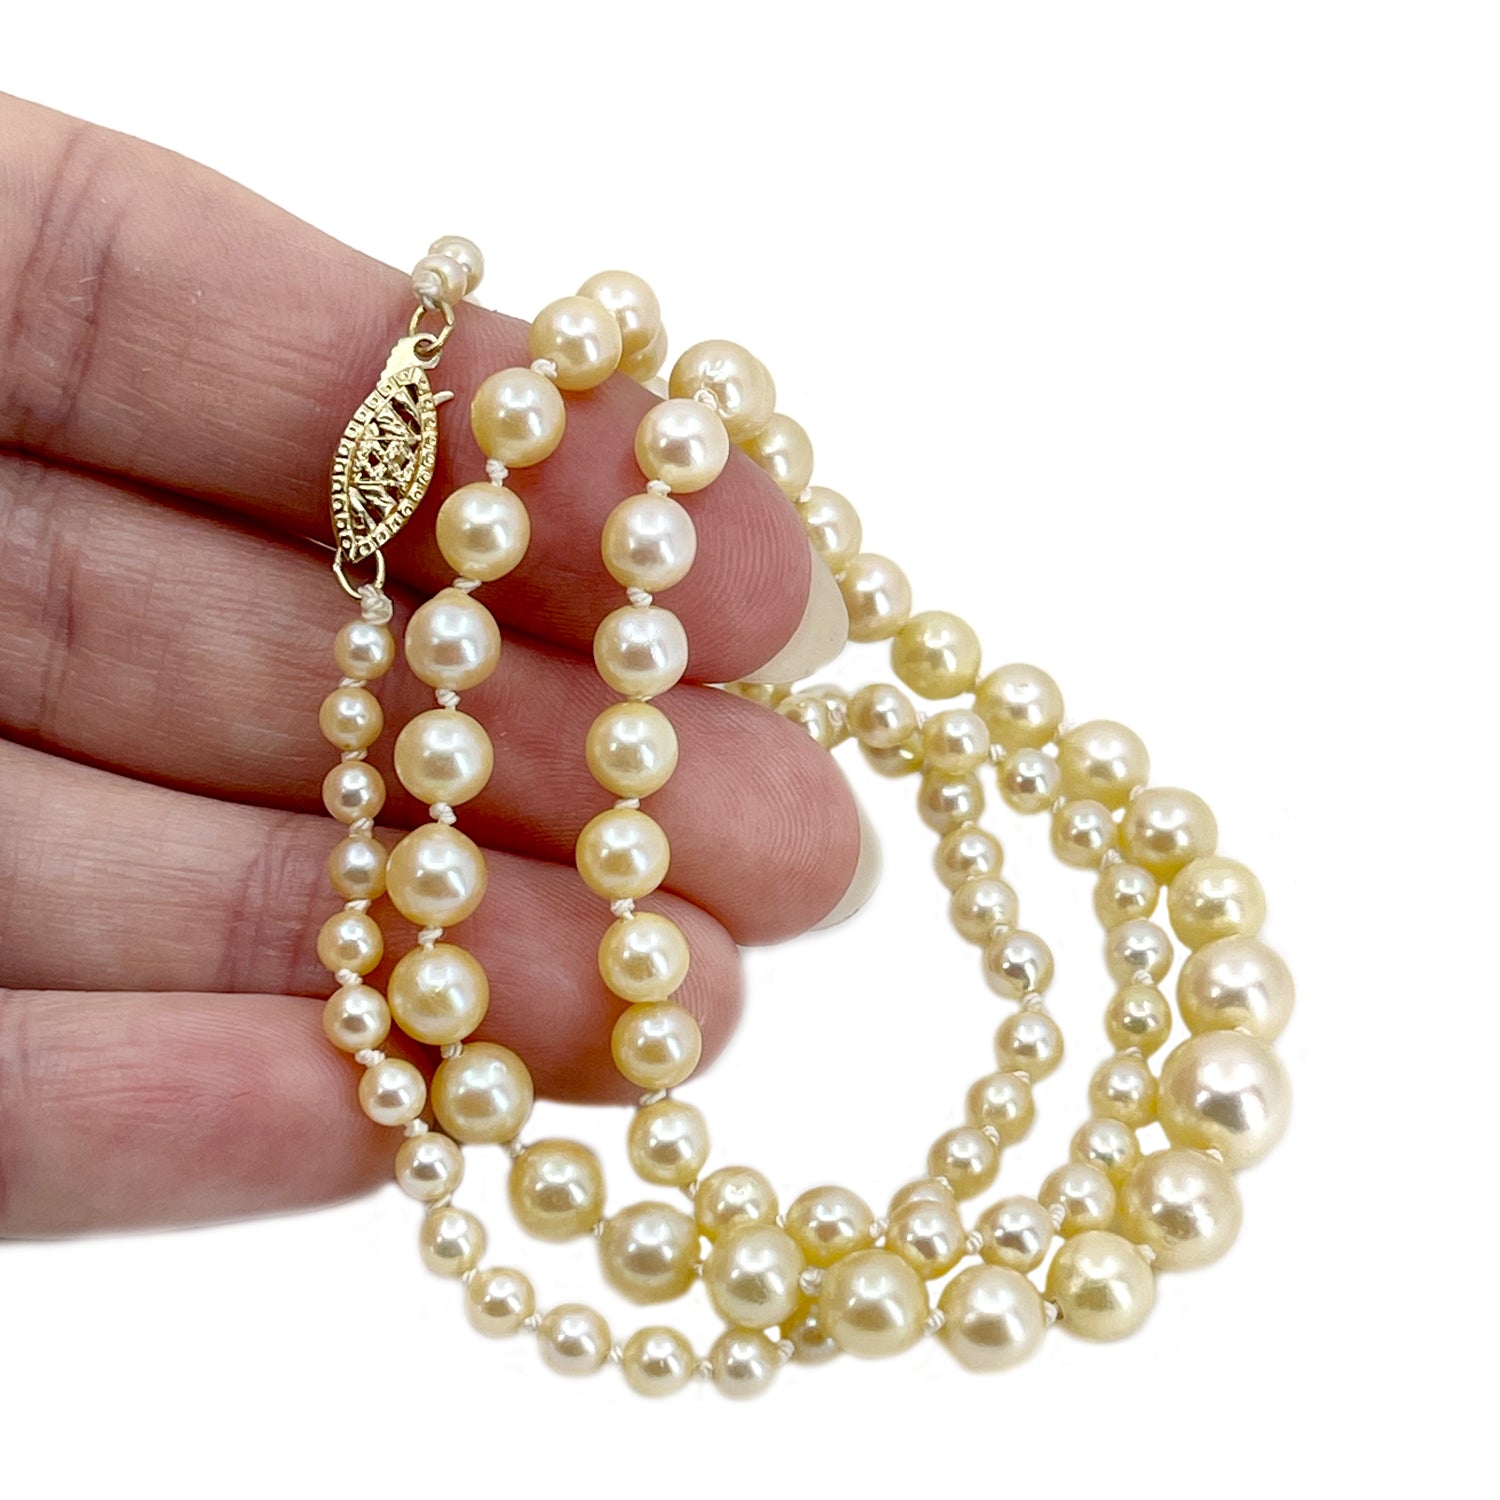 Golden Cream Estate Japanese Cultured Saltwater Akoya Pearl Vintage Necklace - 14K Yellow Gold 21 Inch